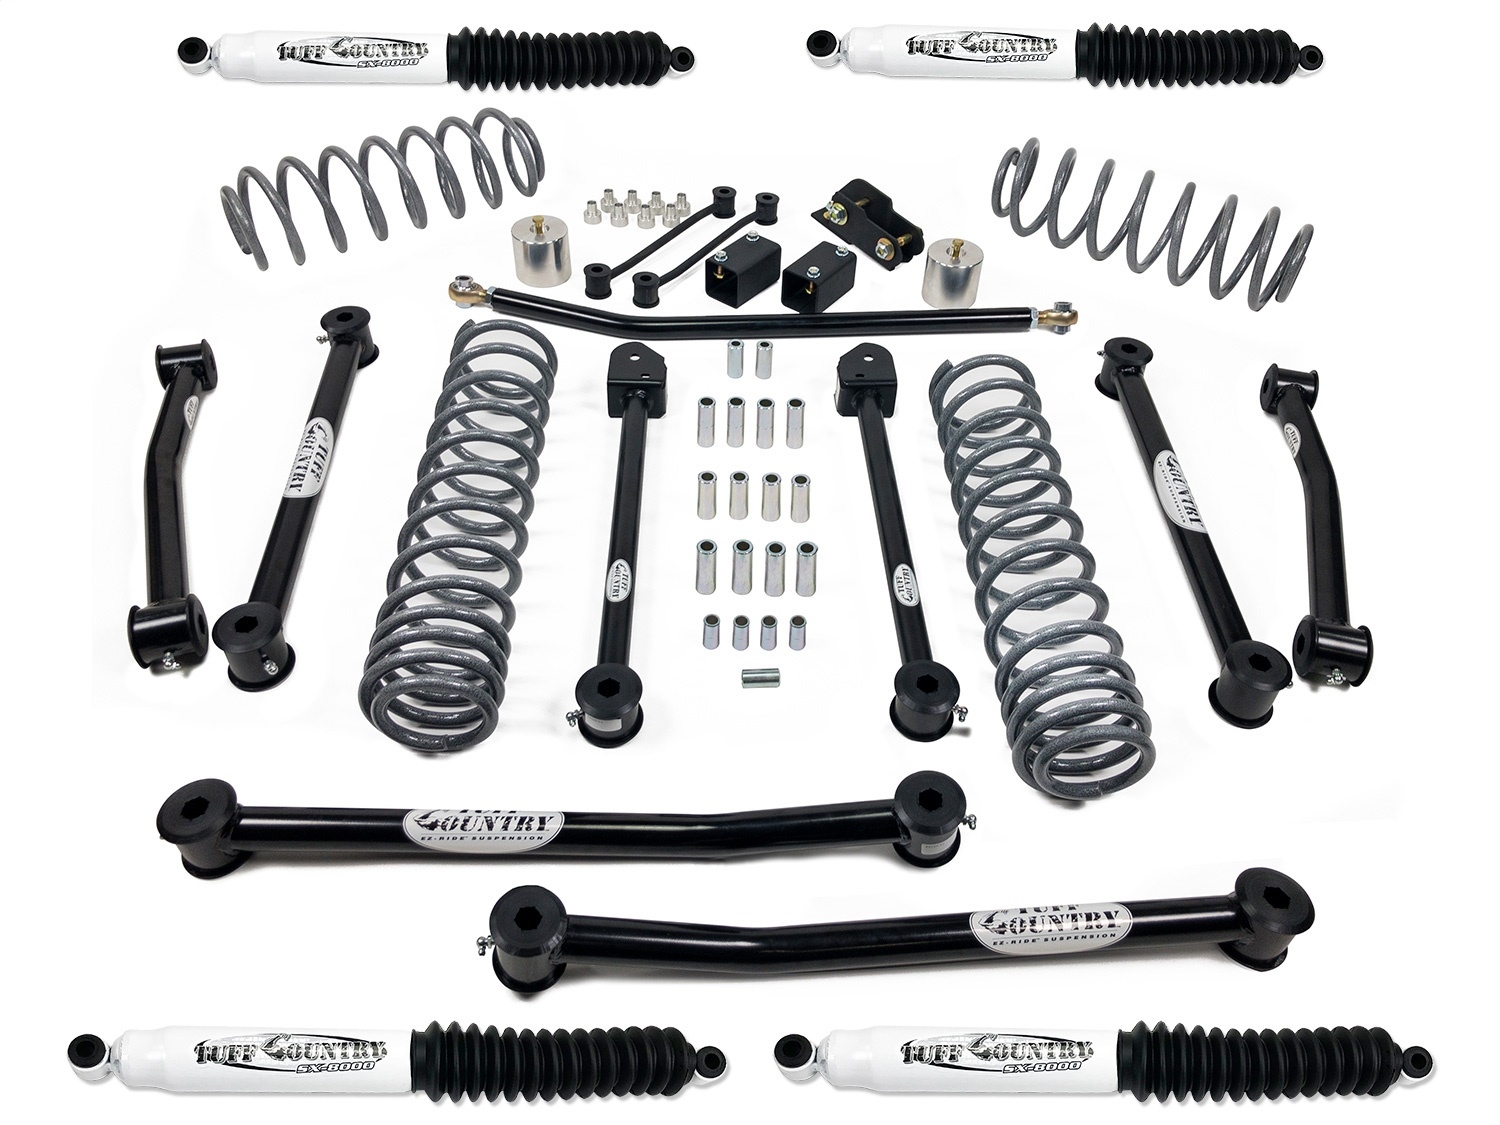 Tuff Country Complete Kit (W/sx8000 Shocks)-4In., Suspension Parts, BKFW-44100KN